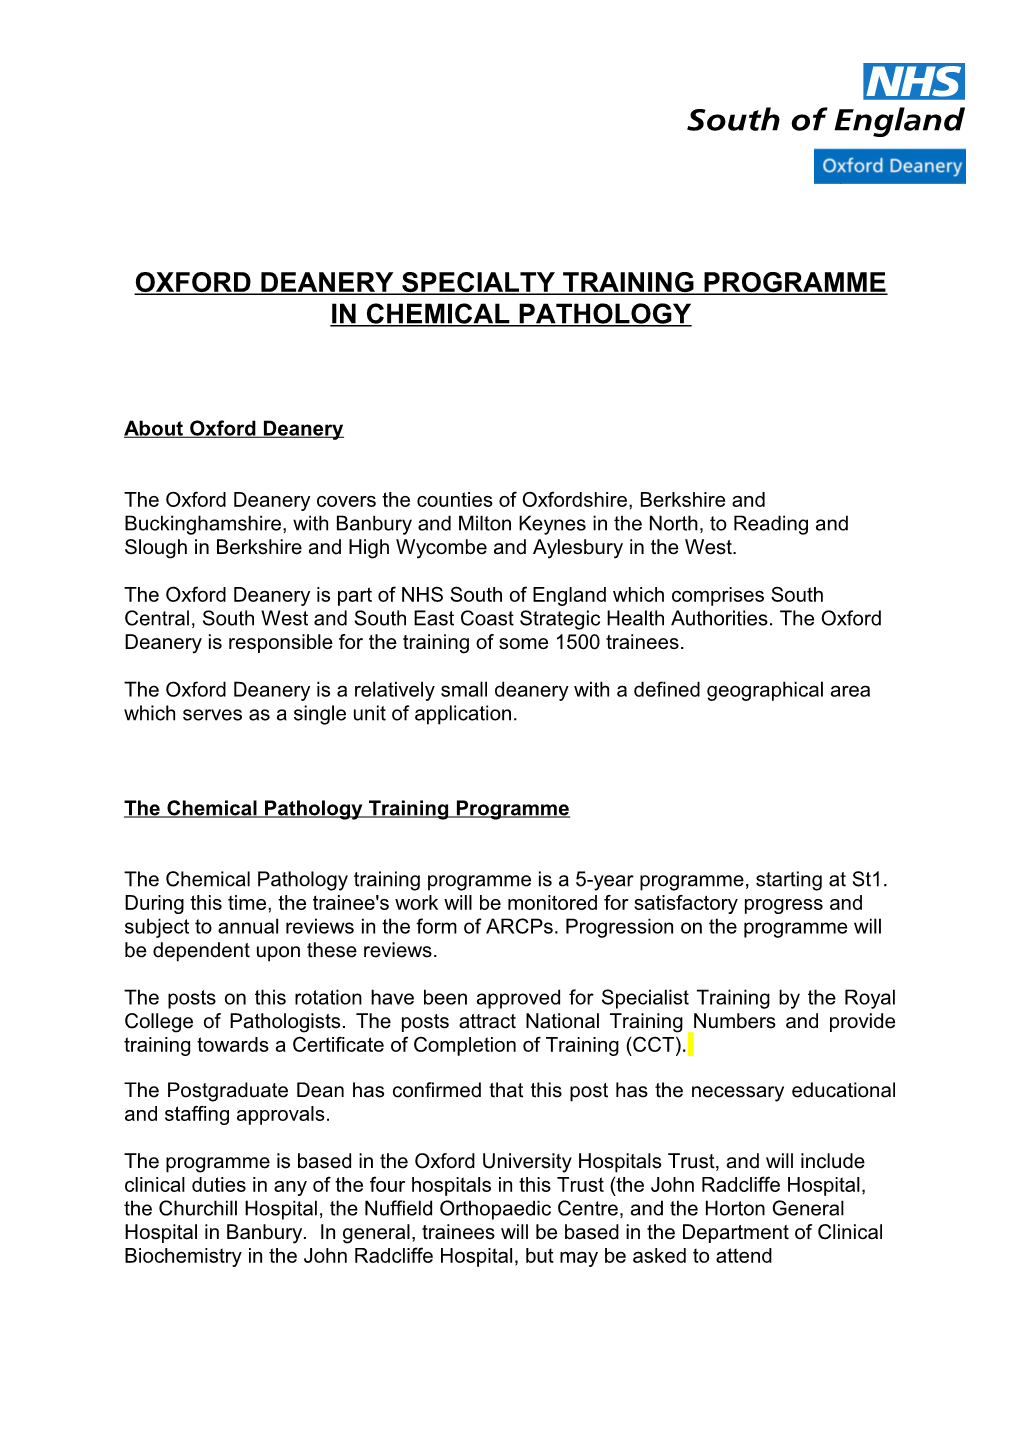 Oxford Deanery Specialty Training Programme in Chemical Pathology